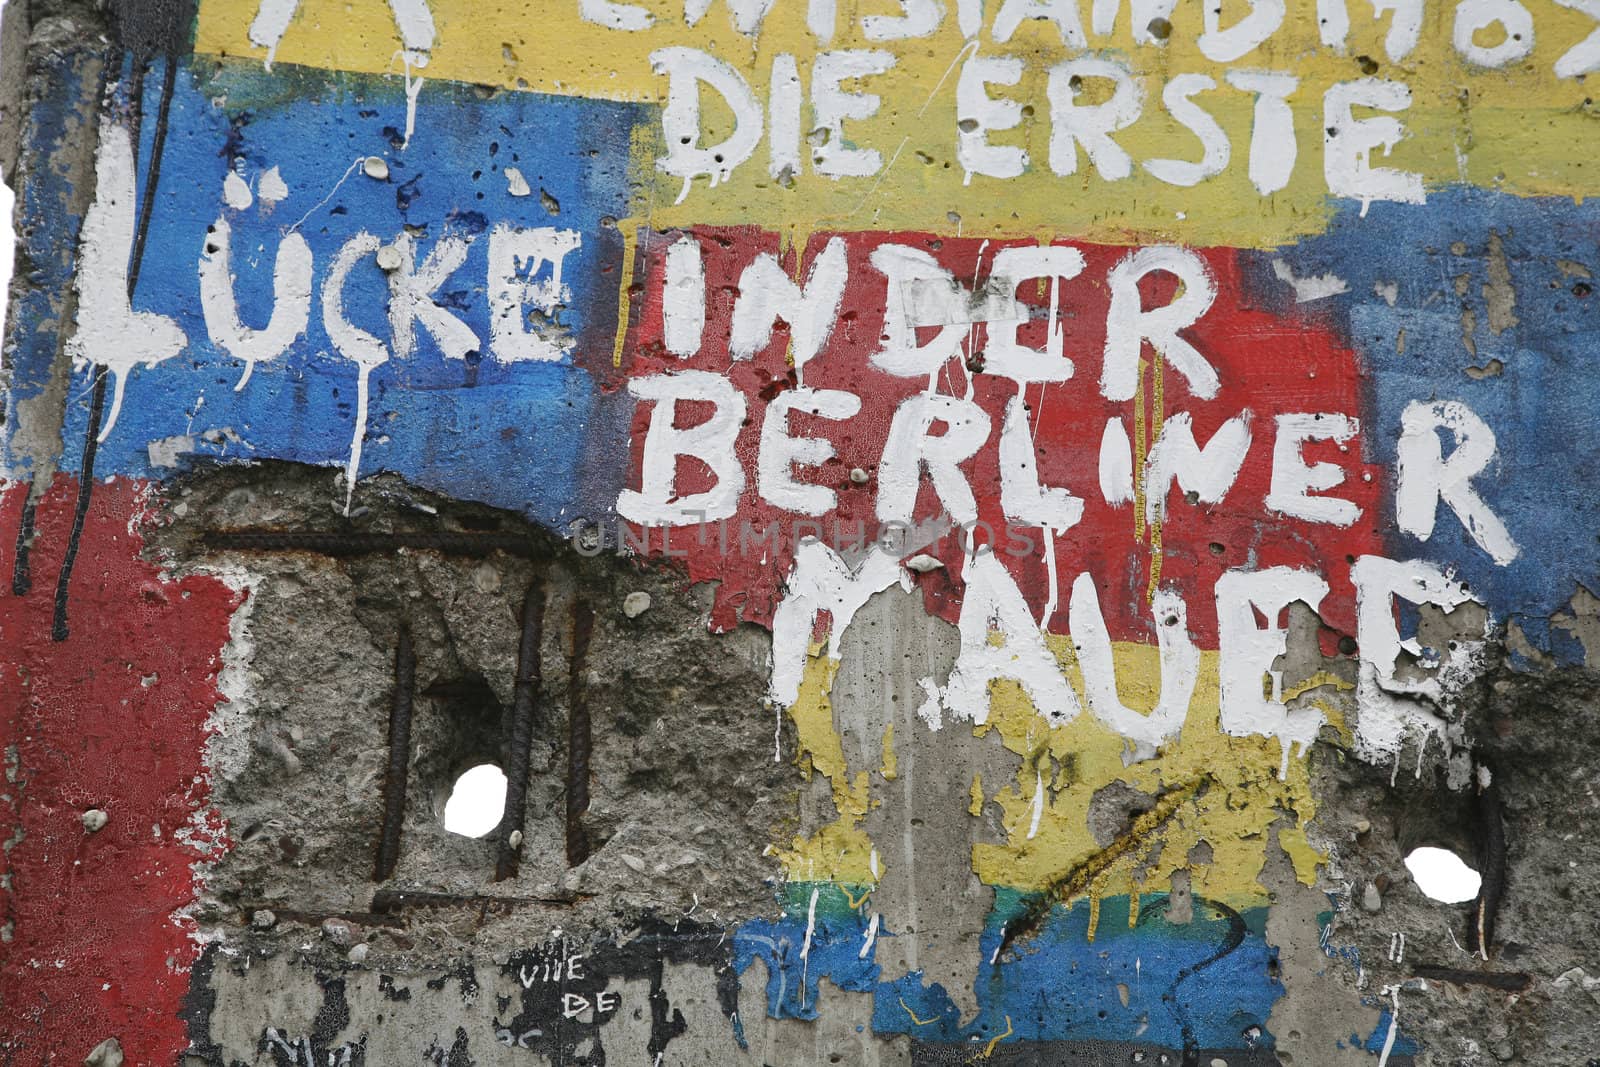 Fragment of the Berlin wall (series) by ABCDK